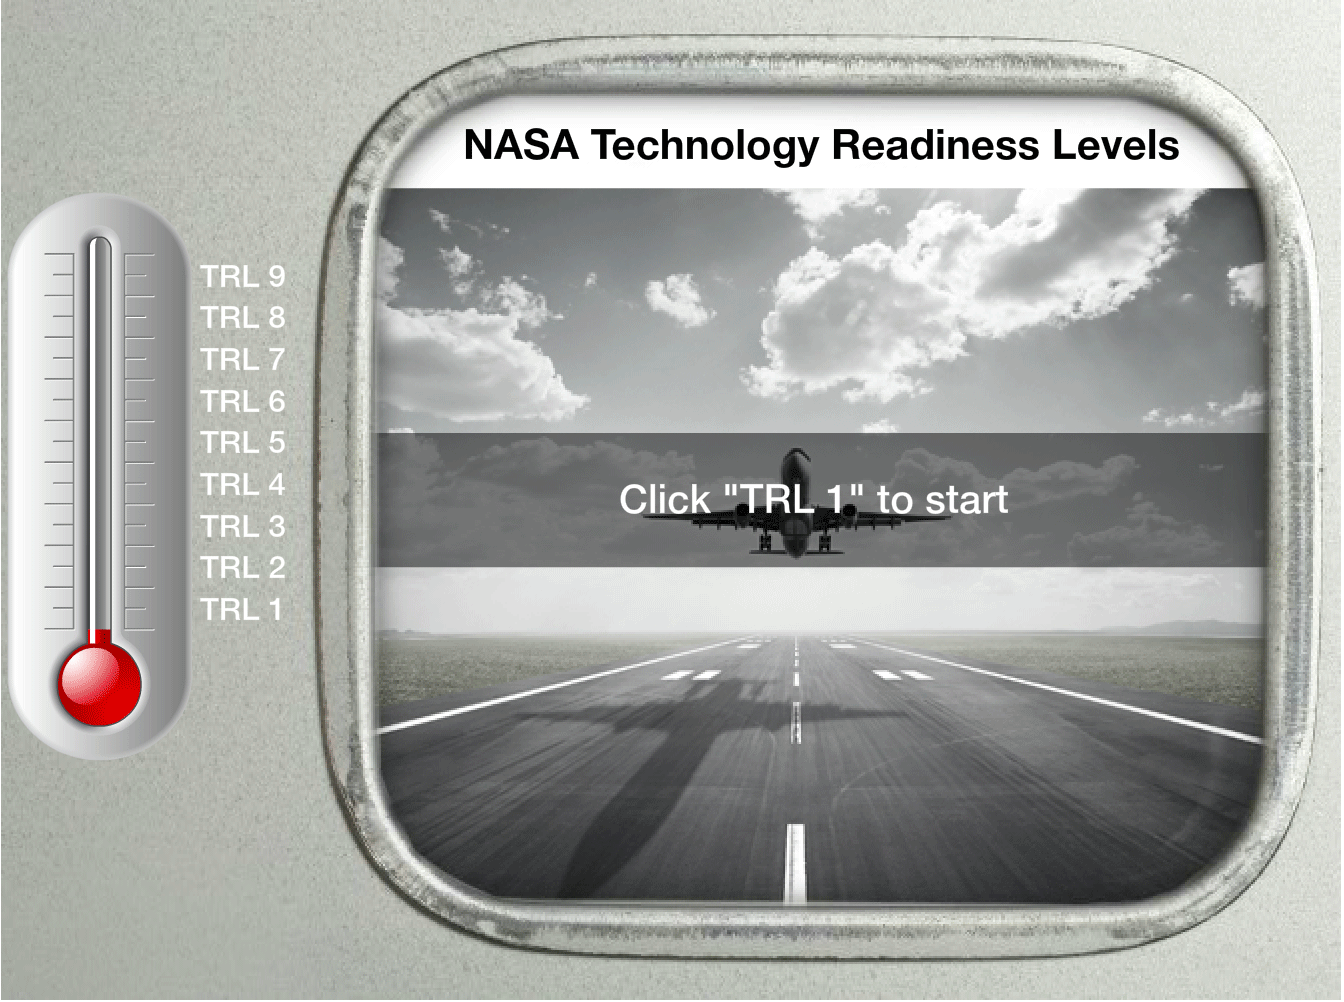 An animate graphic labels the nine technology readiness levels NASA uses.